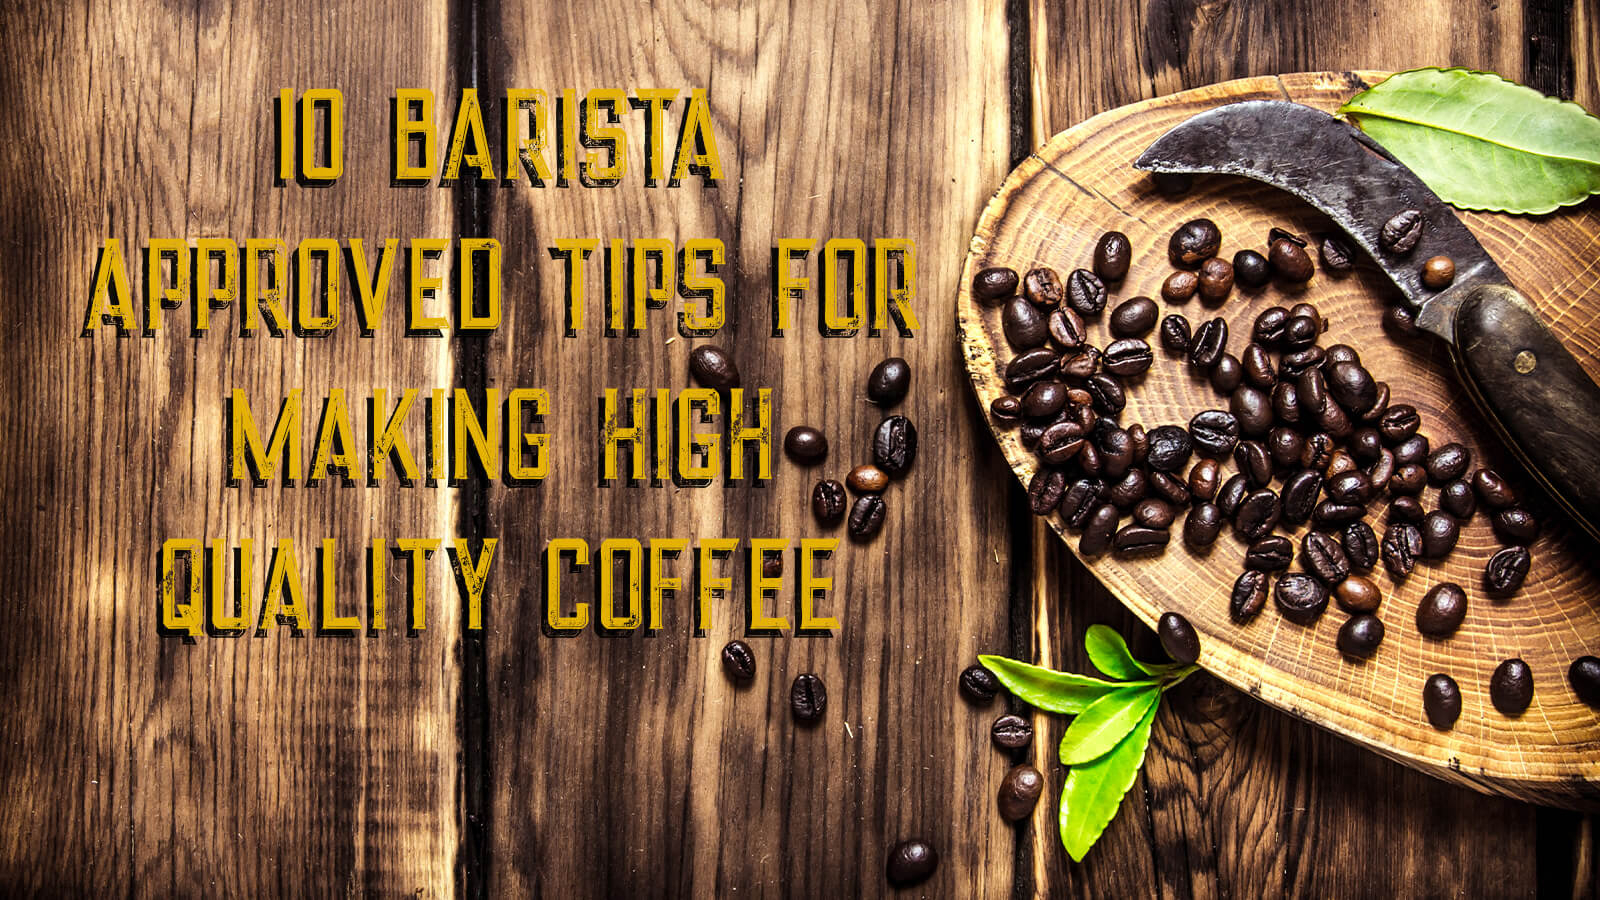 10 BARISTA-APPROVED TIPS FOR MAKING HIGH-QUALITY COFFEE